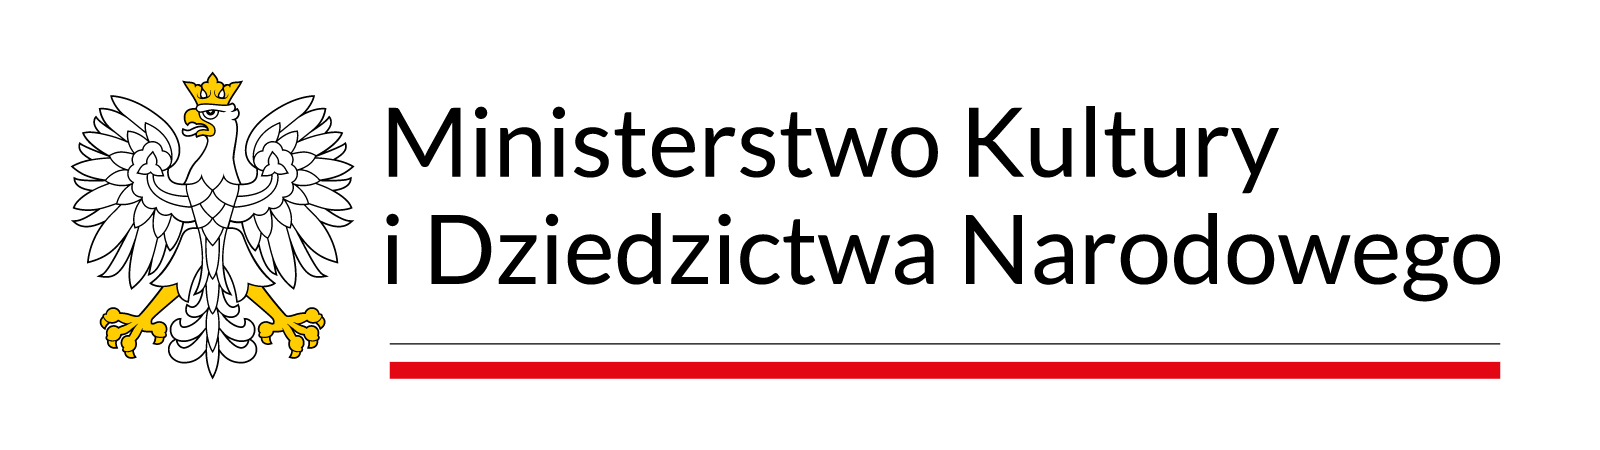 Polish Ministry of Culture logo